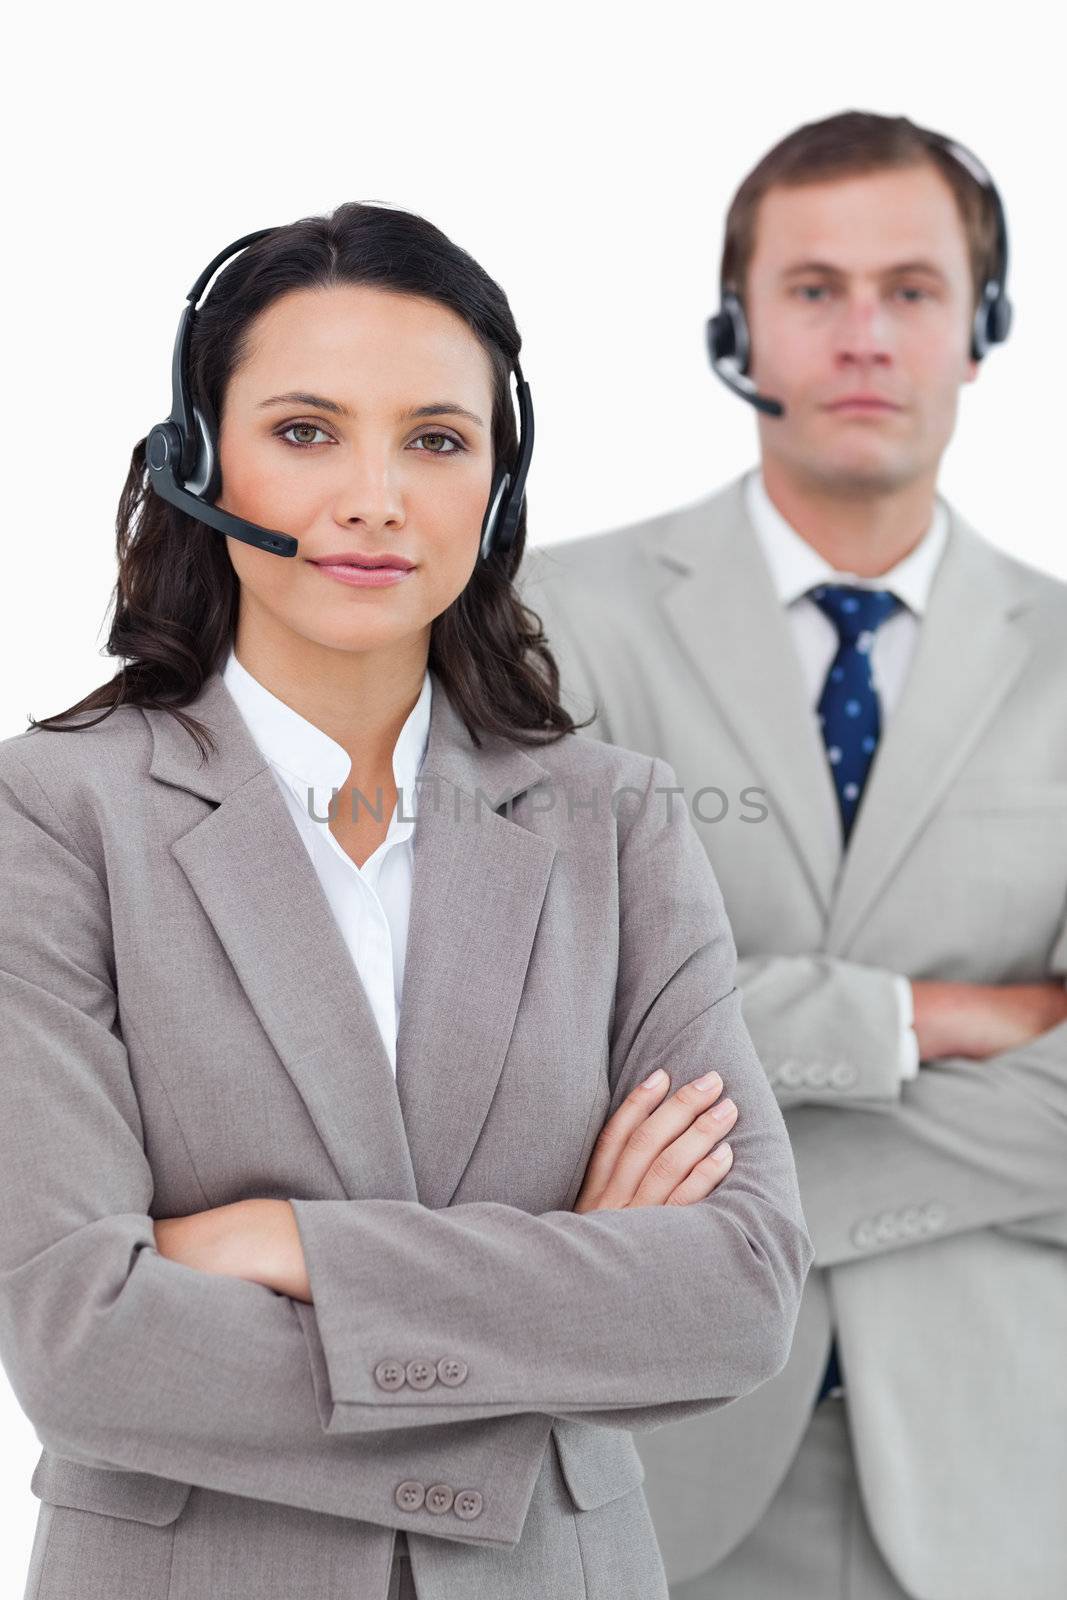 Call center agents with headsets and arms folded by Wavebreakmedia